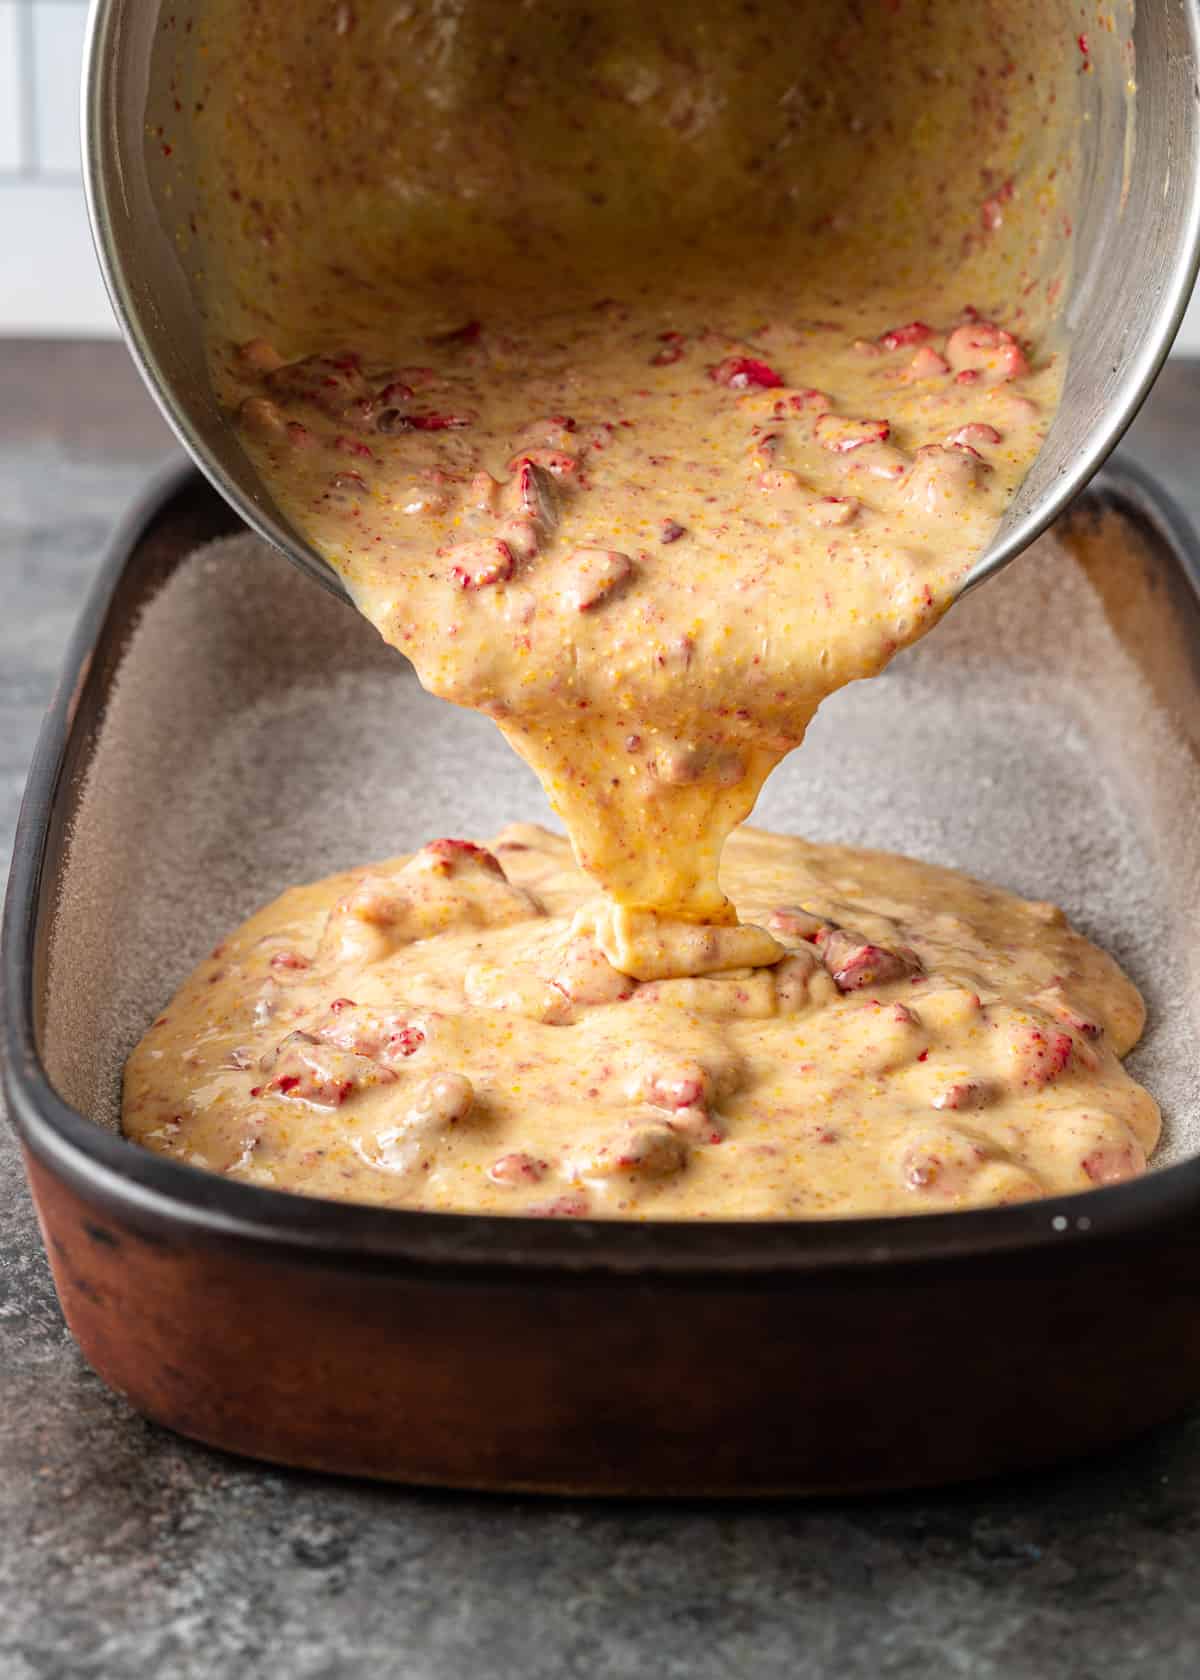 side view: pouring strawberry cornmeal cake batter into a baking dish